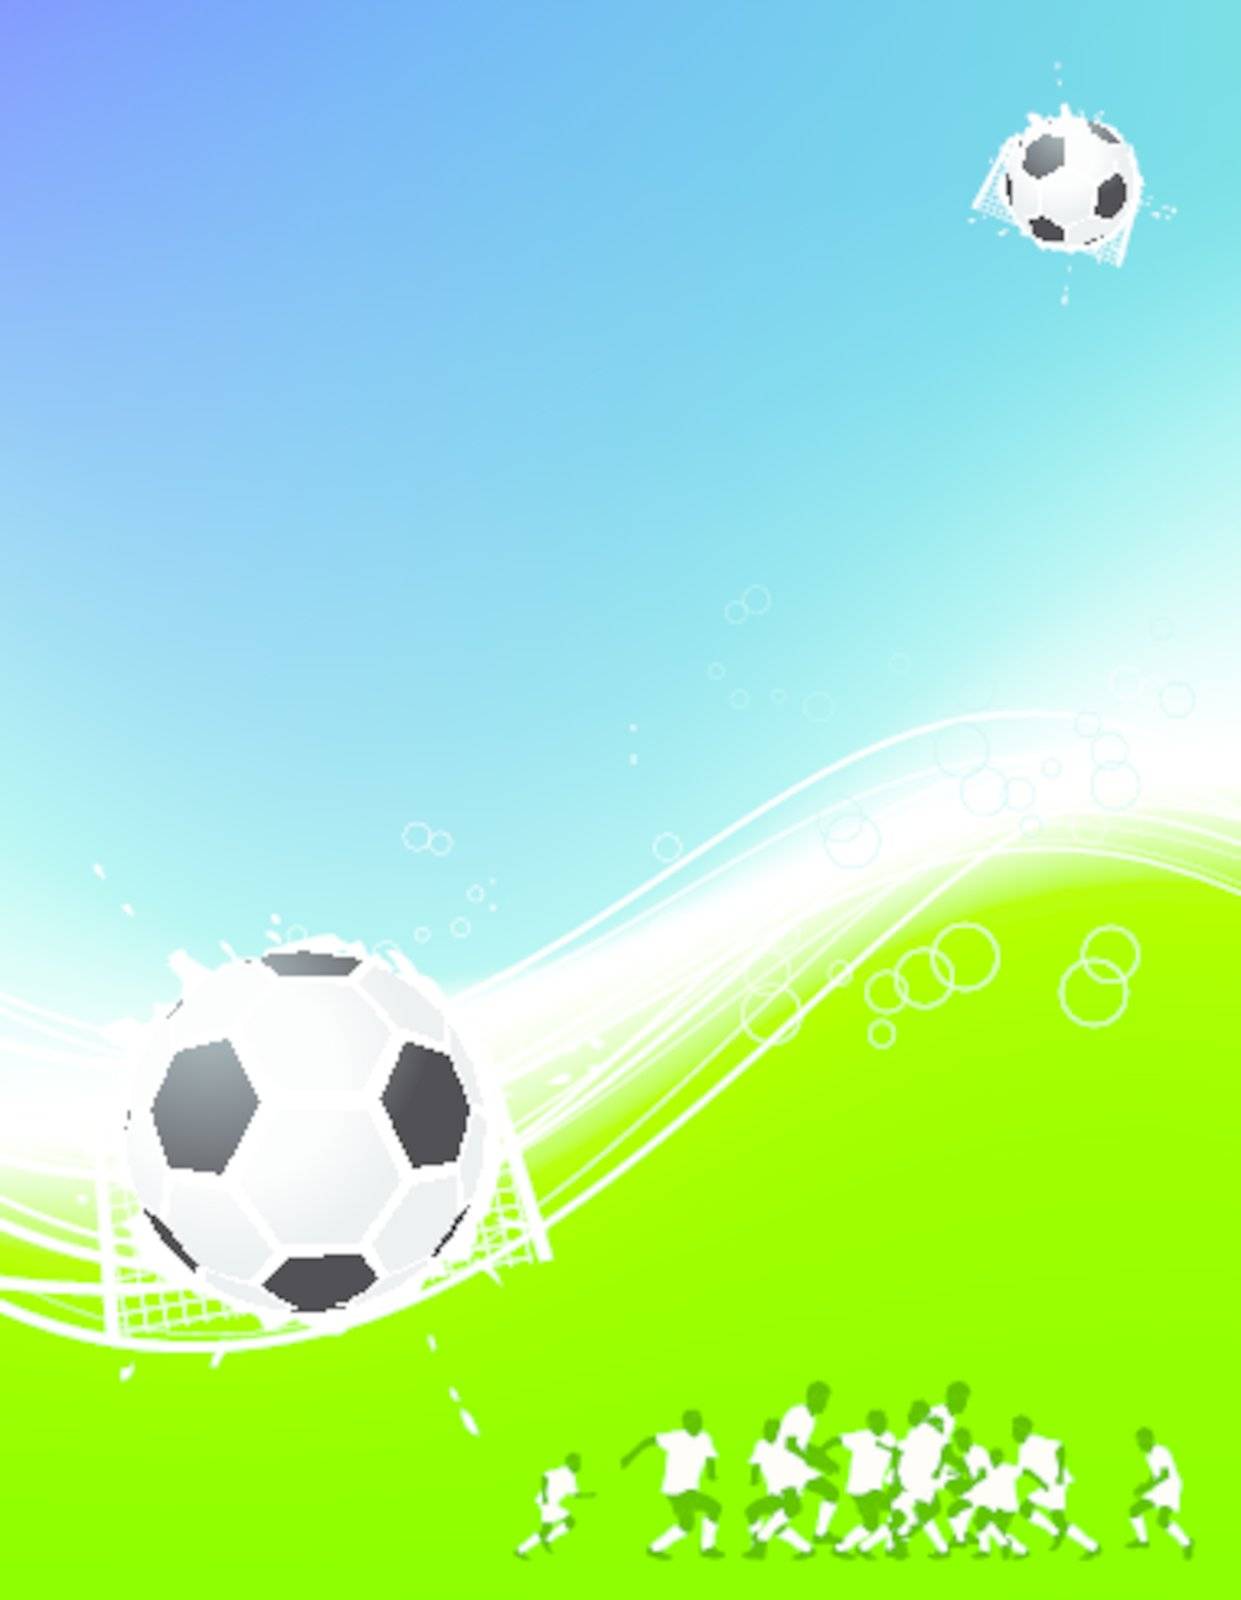 Football background for your design. Players on field, soccer ball by Kudryashka